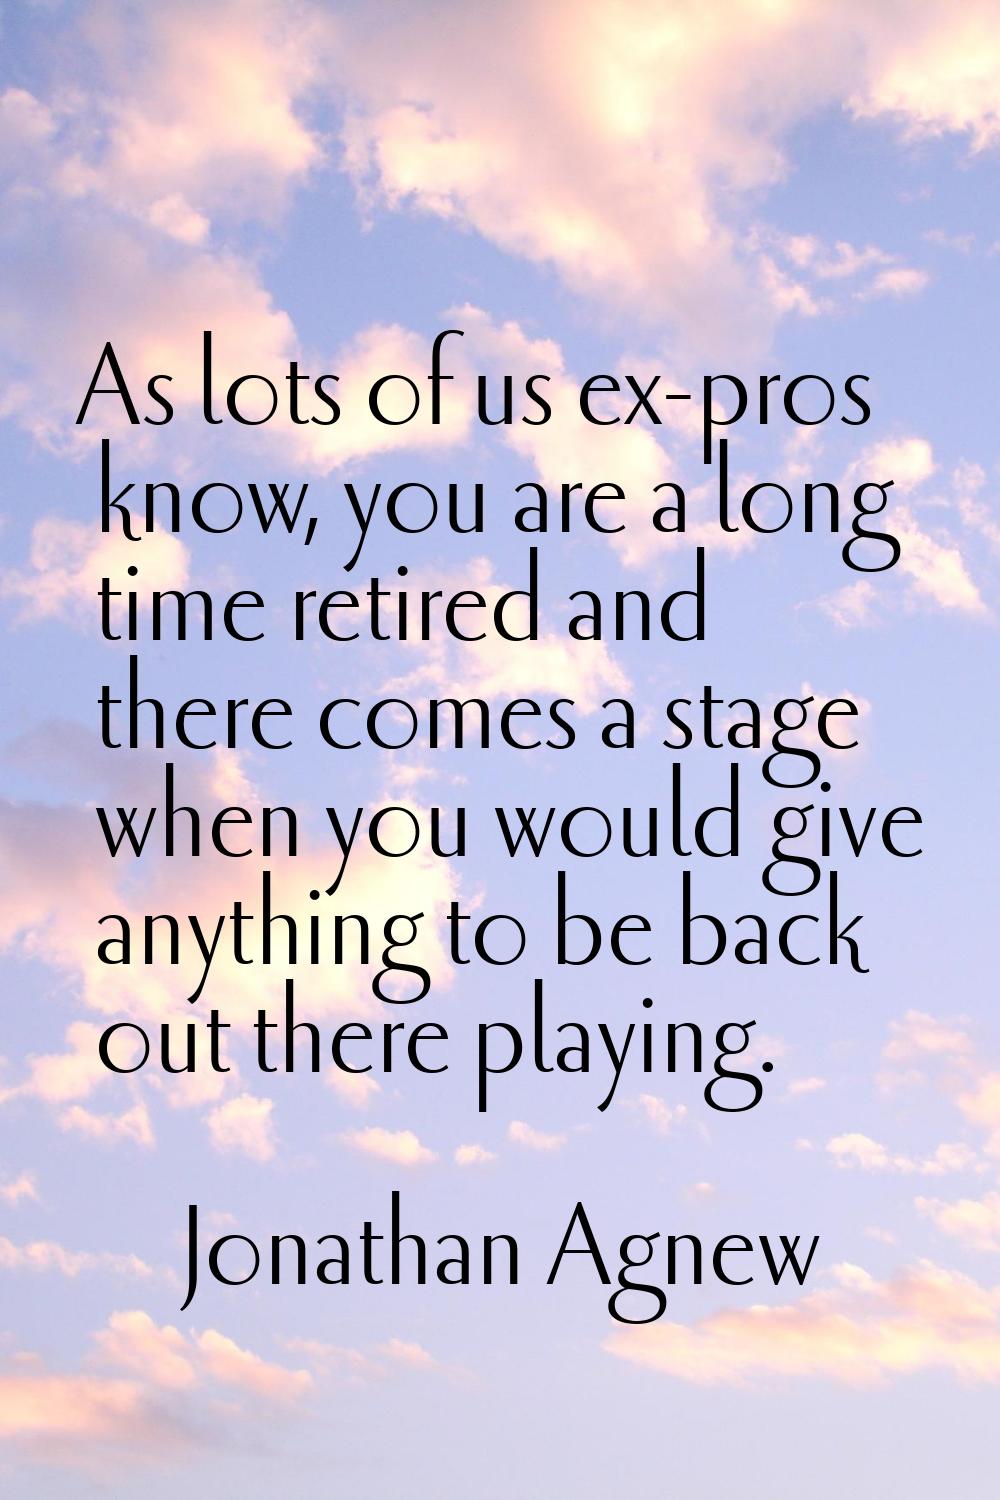 As lots of us ex-pros know, you are a long time retired and there comes a stage when you would give